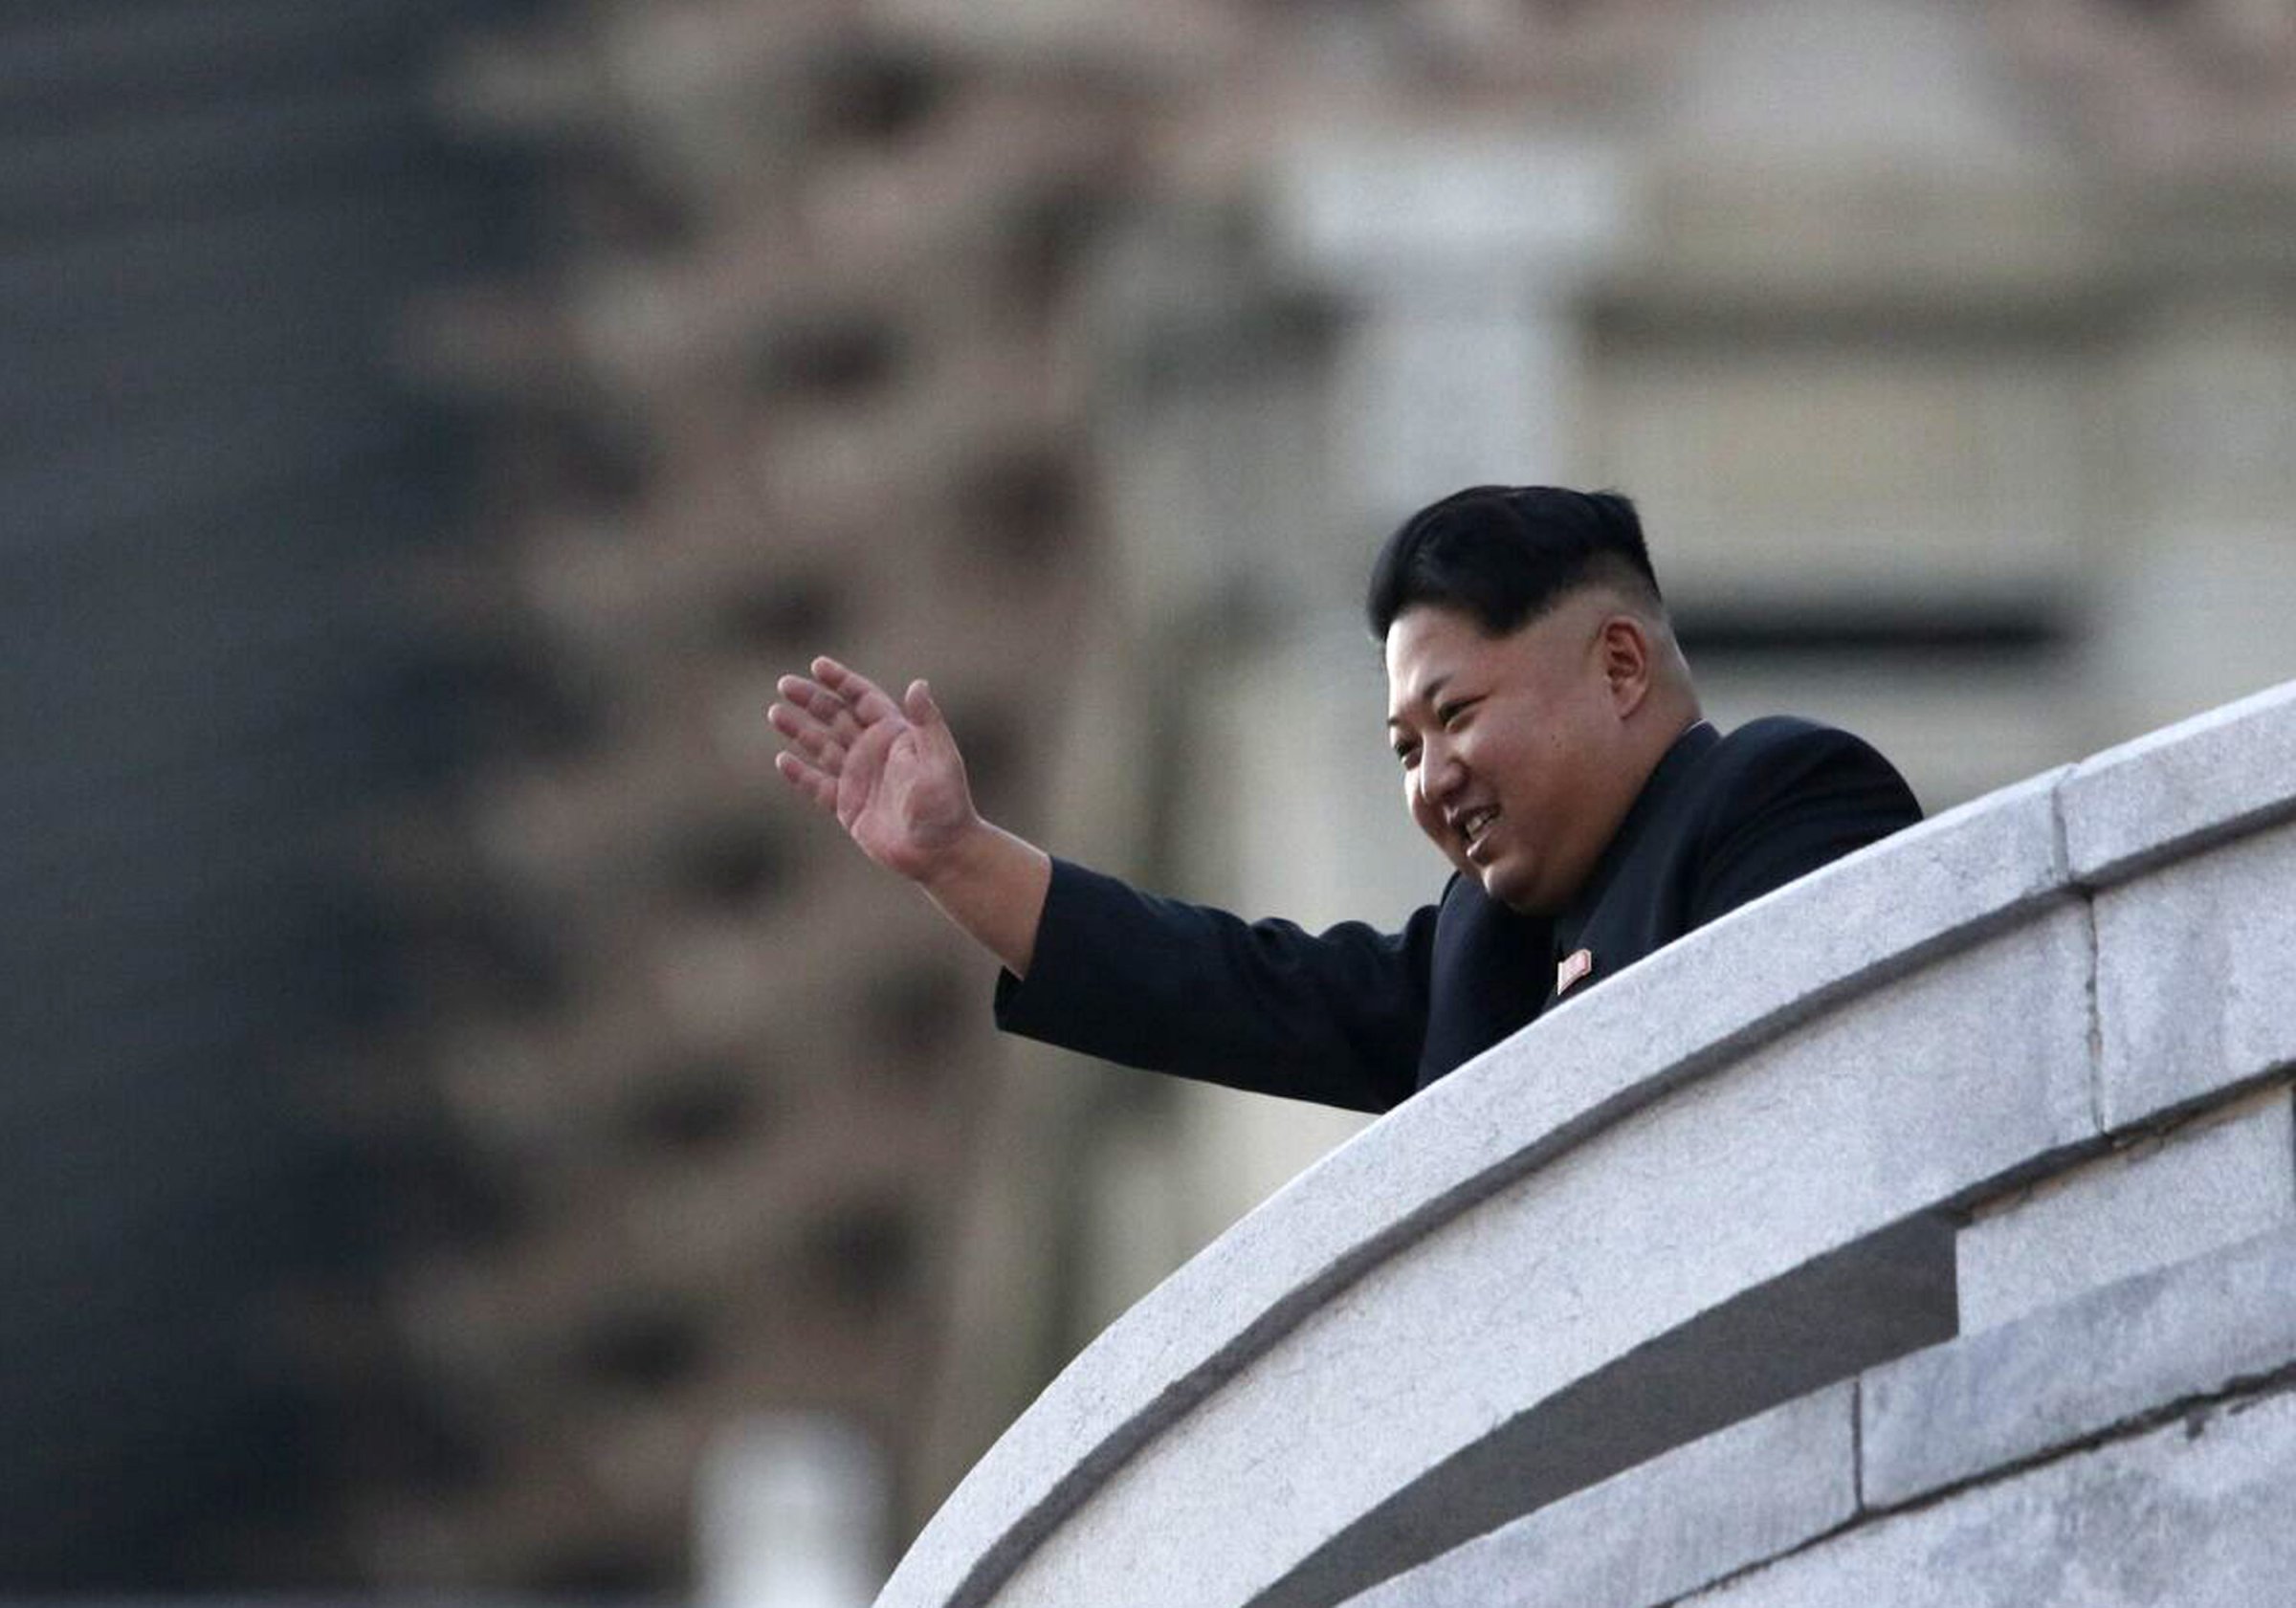 PYONGYANG, NORTH KOREA - OCTOBER 10: (CHINA OUT) North Korea's leader Kim Jong-Un waves from a balcony towards participants of a mass military parade at Kim Il-Sung square to mark the 70th anniversary of its ruling Worker's Party of Korea on October 10, 2015 in Pyongyang, North Korea.  (Photo by ChinaFotoPress/ChinaFotoPress via Getty Images)